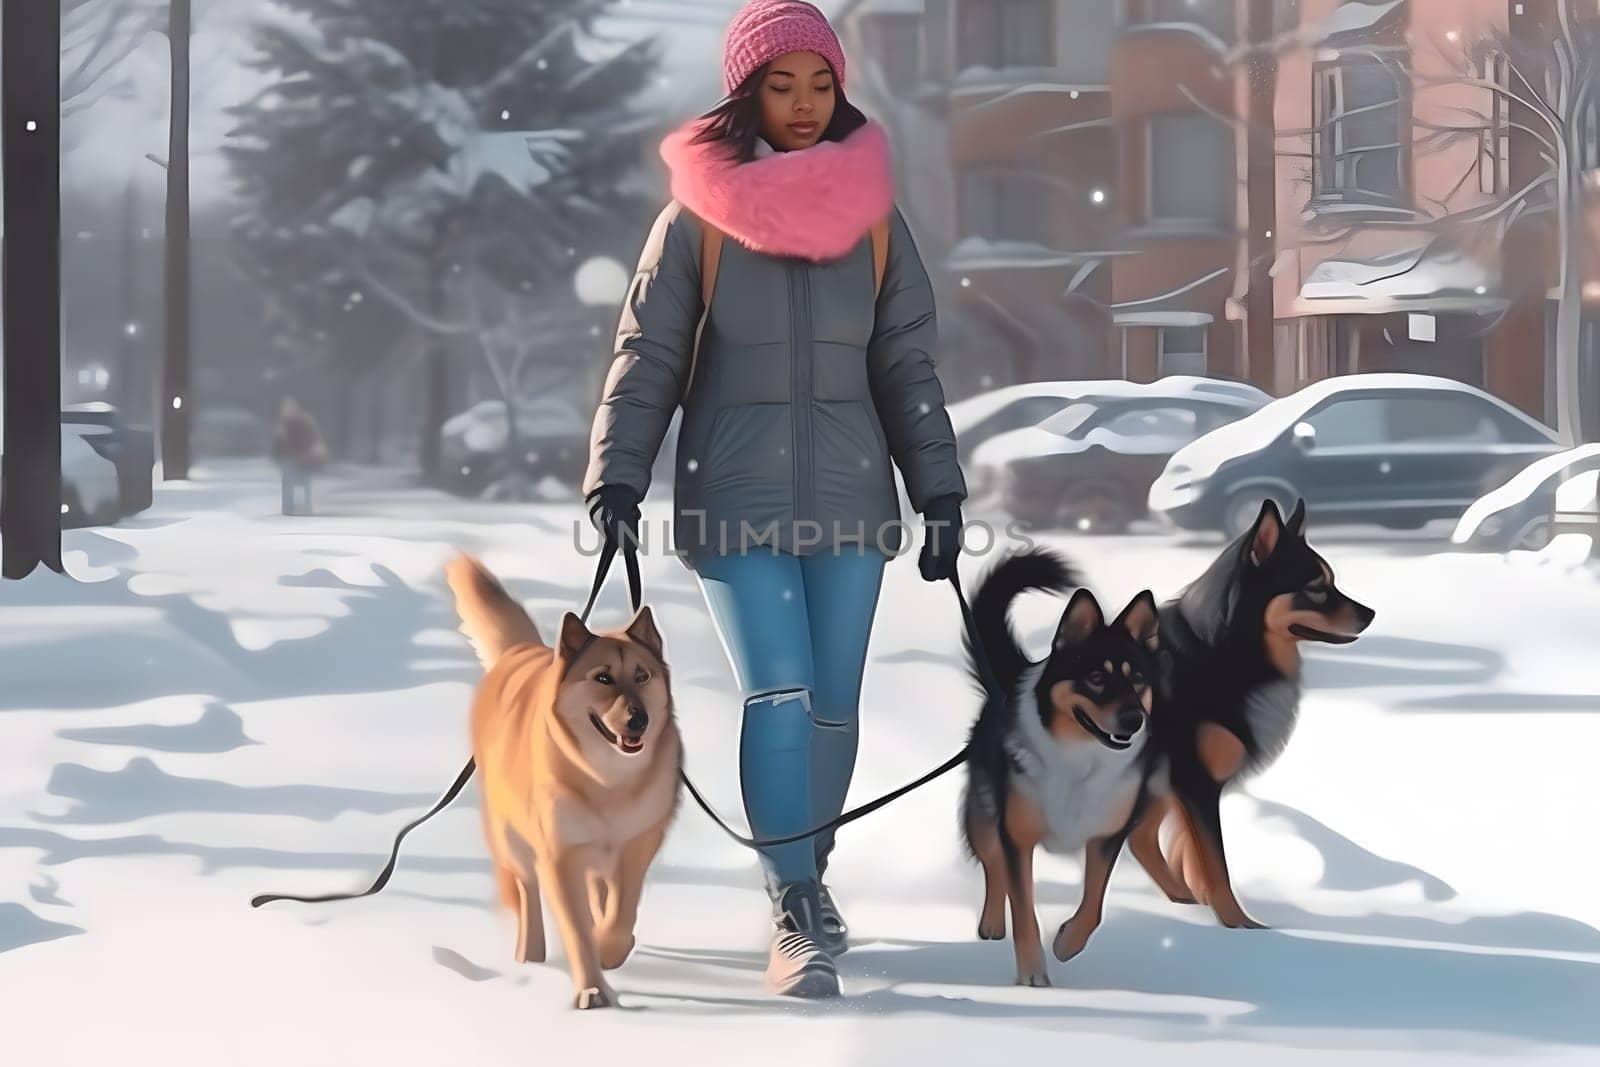 african american woman walking dog at winter, neural network generated art. Digitally generated image. Not based on any actual person, scene or pattern.